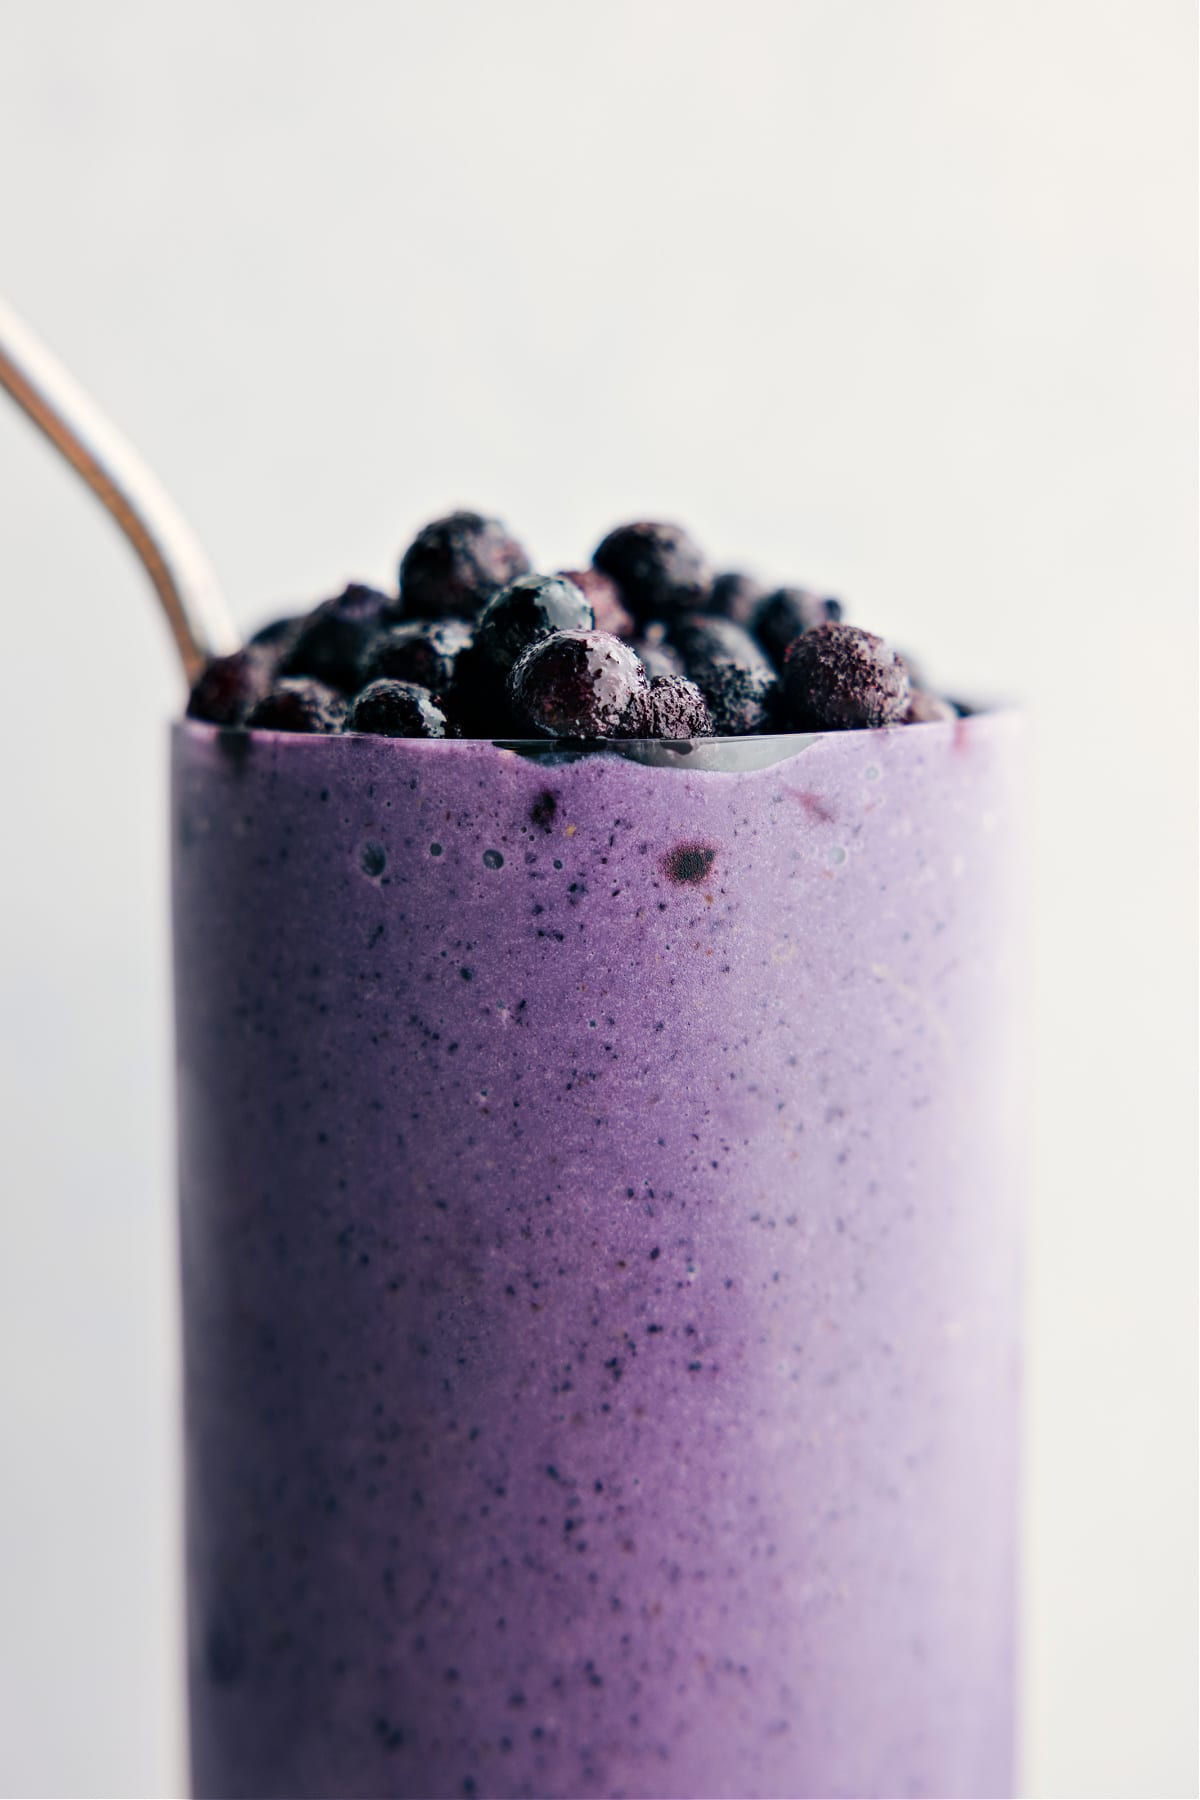 Blueberry smoothie freshly blended with frozen blueberries on top ready to be enjoyed.